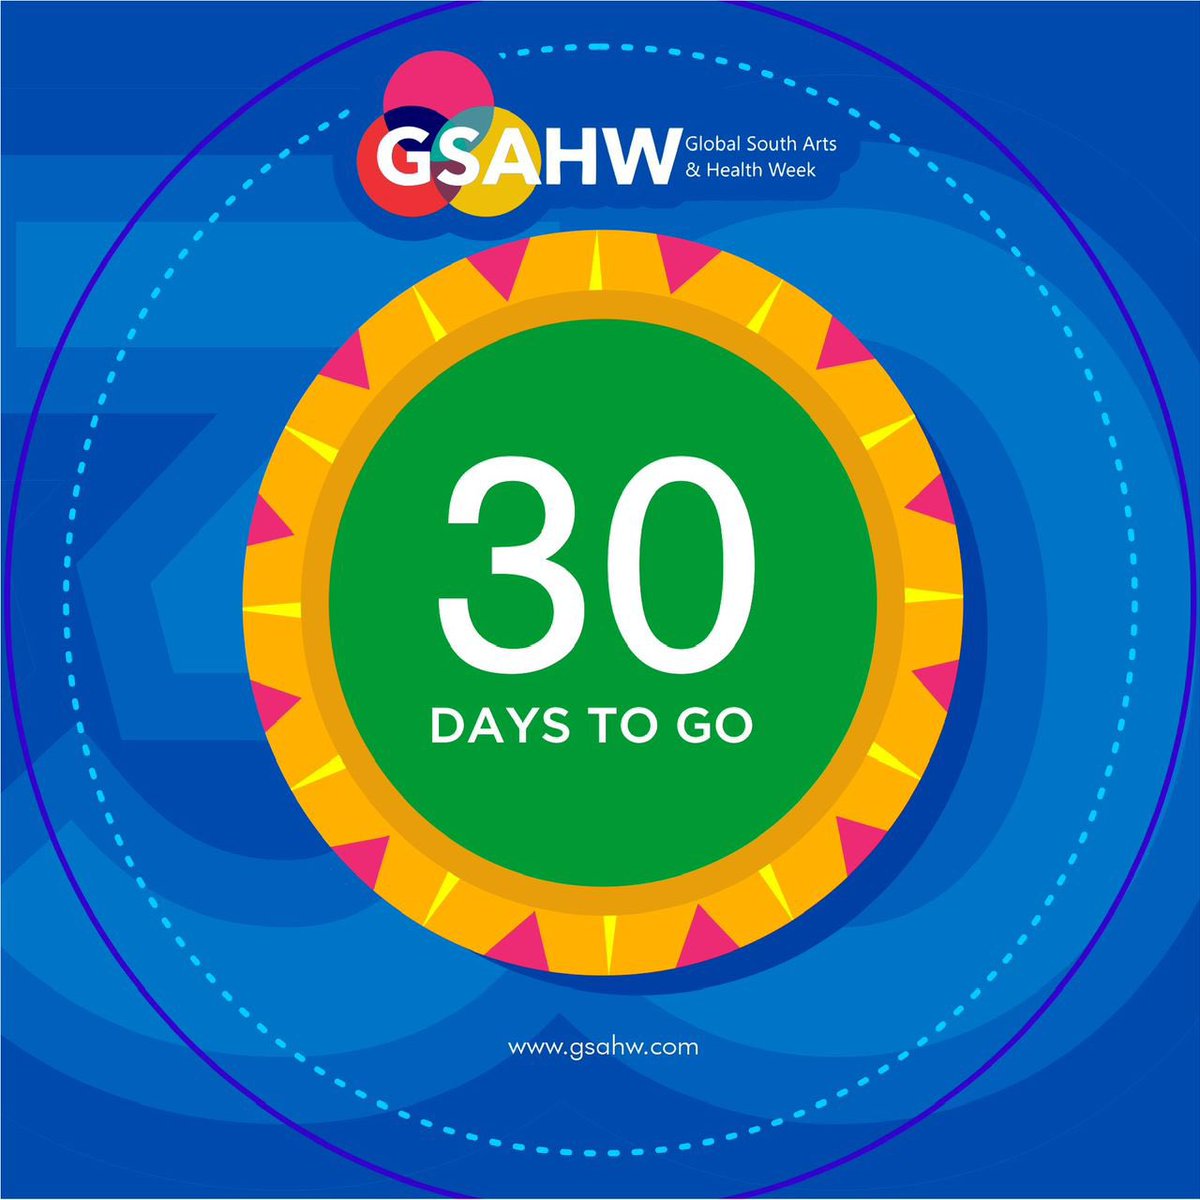 We are excited and looking forward to the maiden edition of the Global South Arts & Health Week which is in 30 days' time. #CountdowntoGSAHW #30DaysToGo #ArtsinHealth #Africa #Asia #LatinAmerica #GlobalSouthArtsandHealthWeek